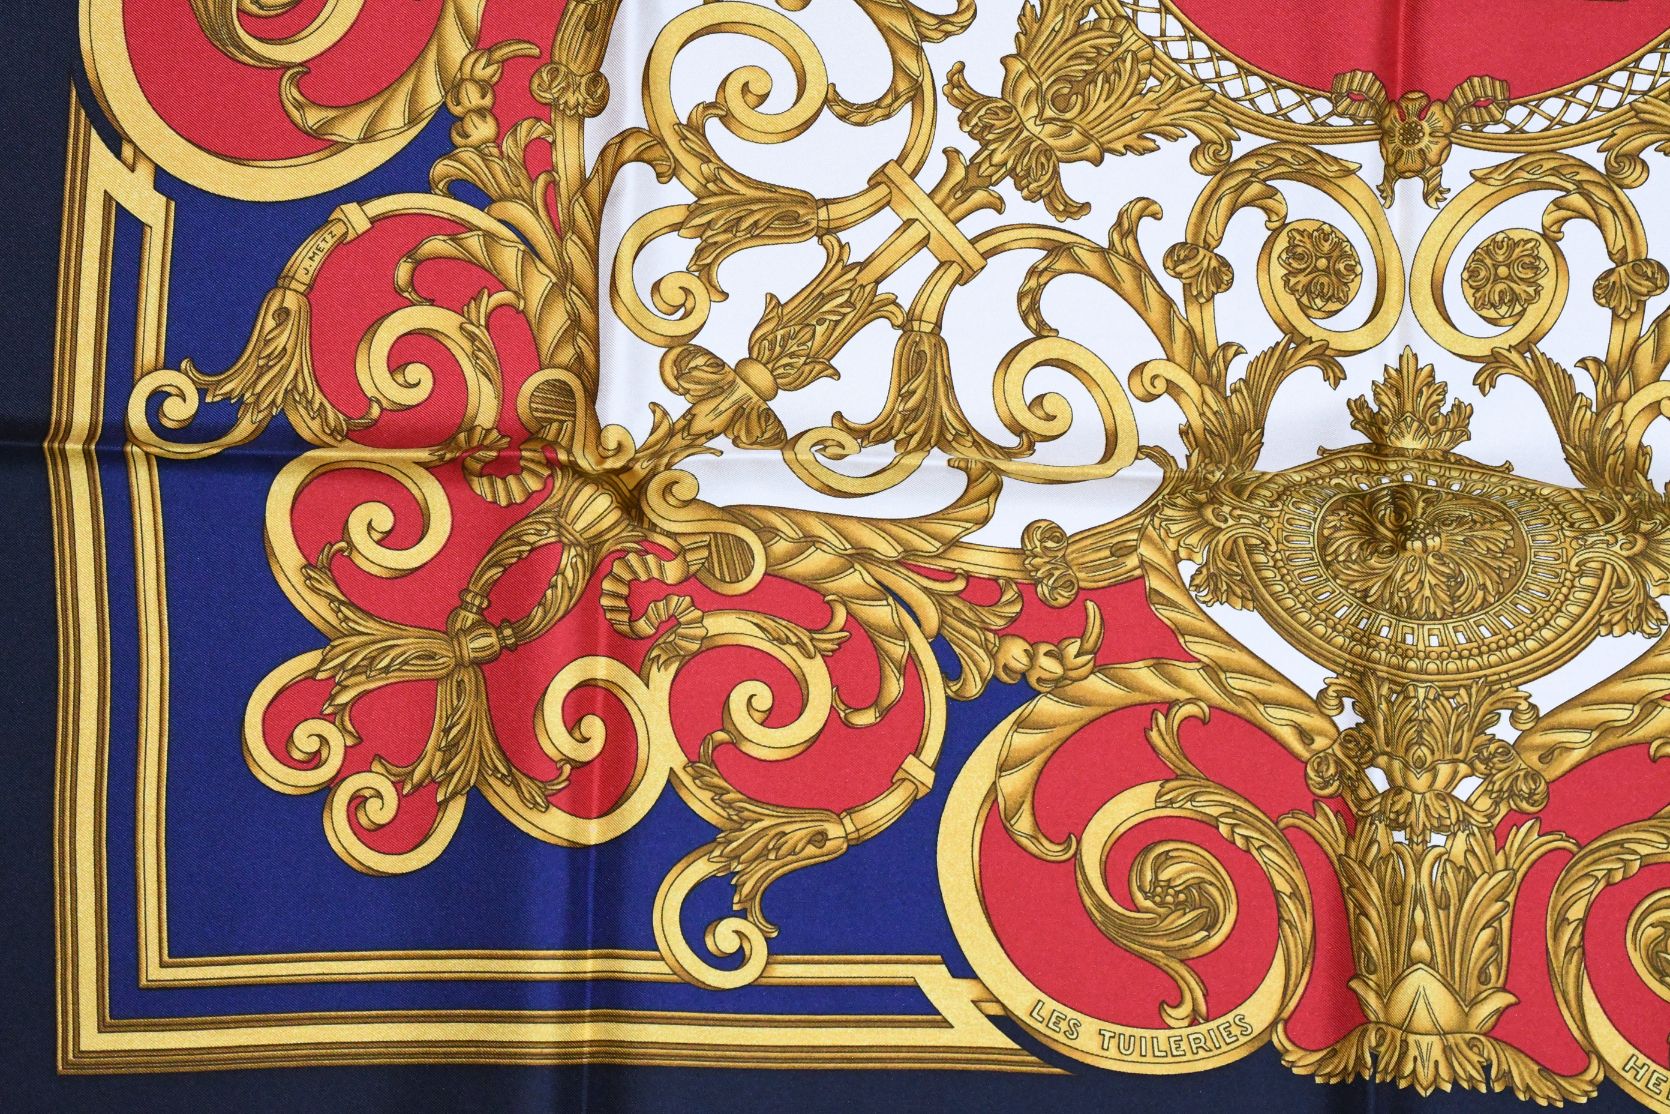 HERMES Scarf Carre90 Yellow LVDOVICVS MAGNVS PARIS Silk 100% Ships From  Japan !!